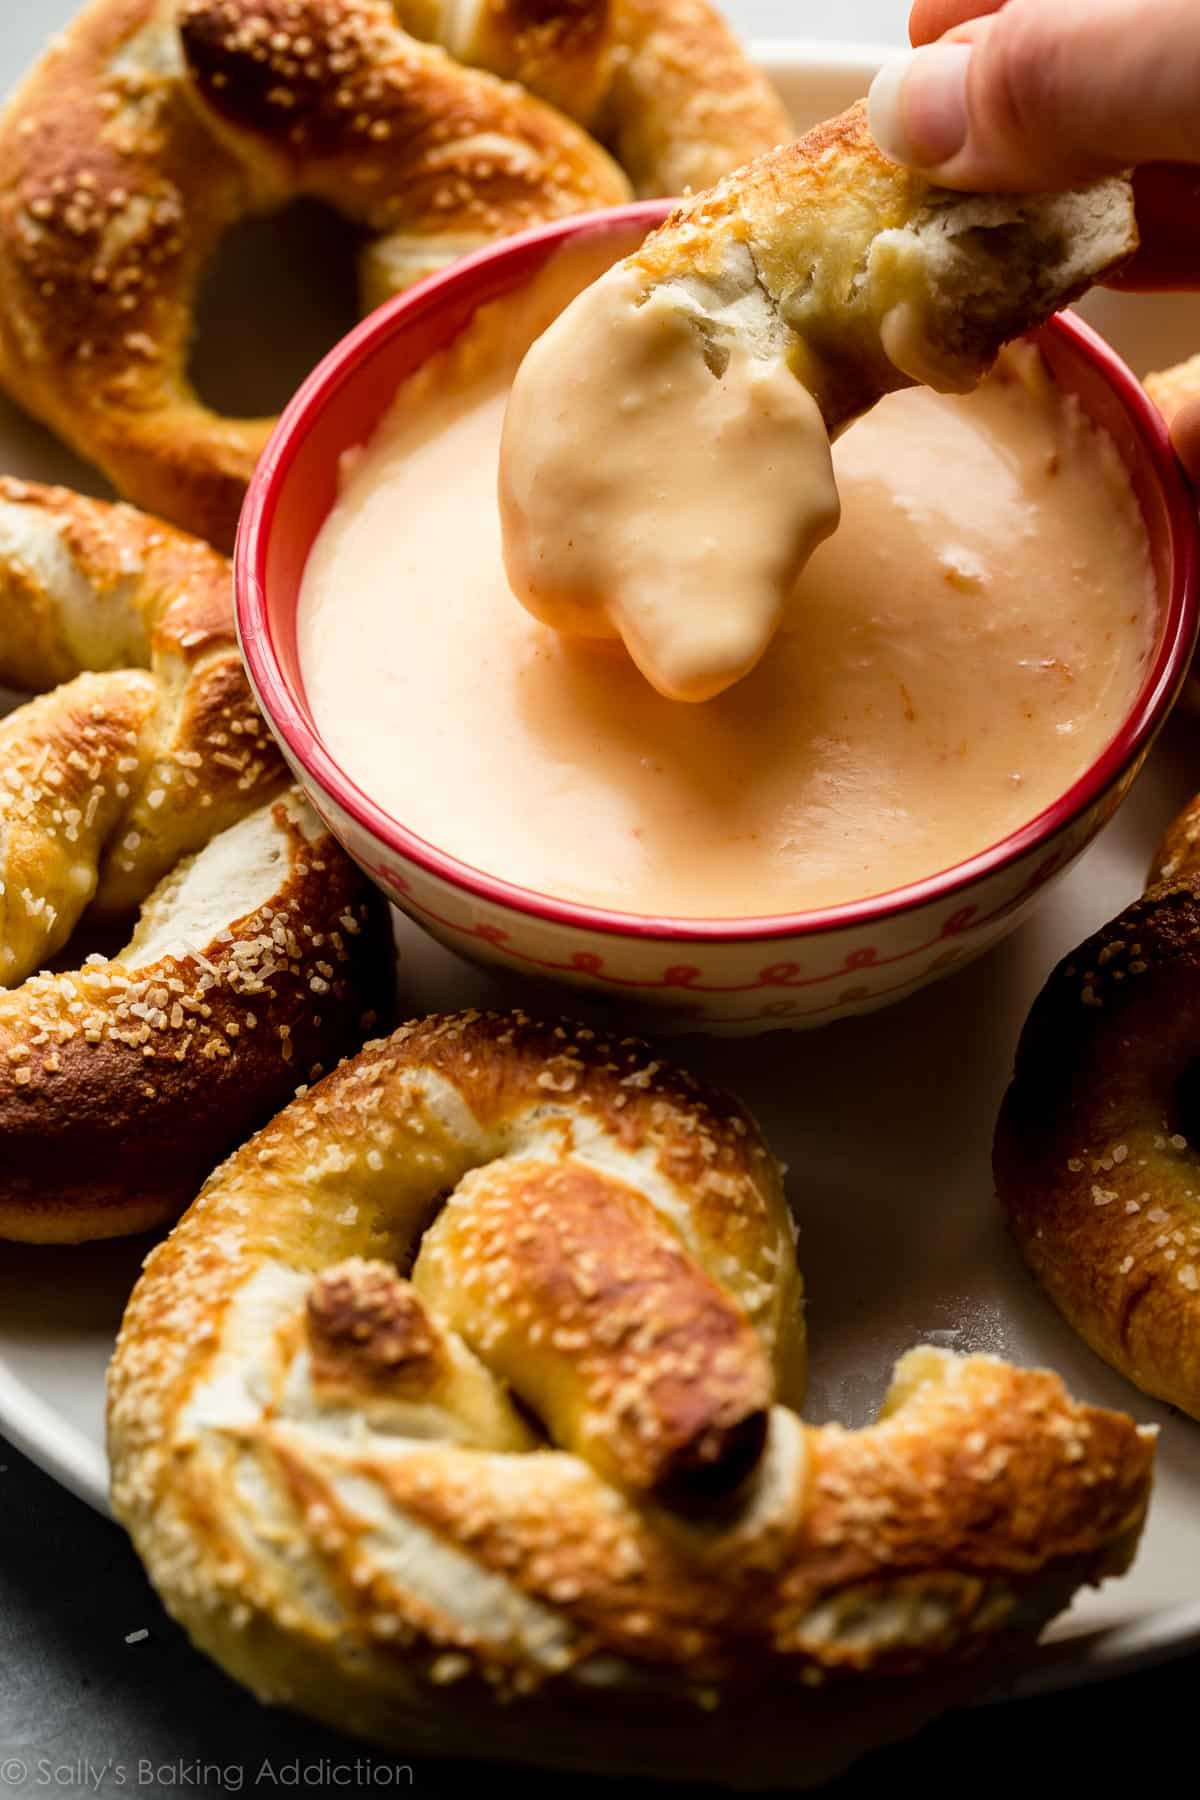 hand dipping piece of soft pretzel into bowl of cheese sauce